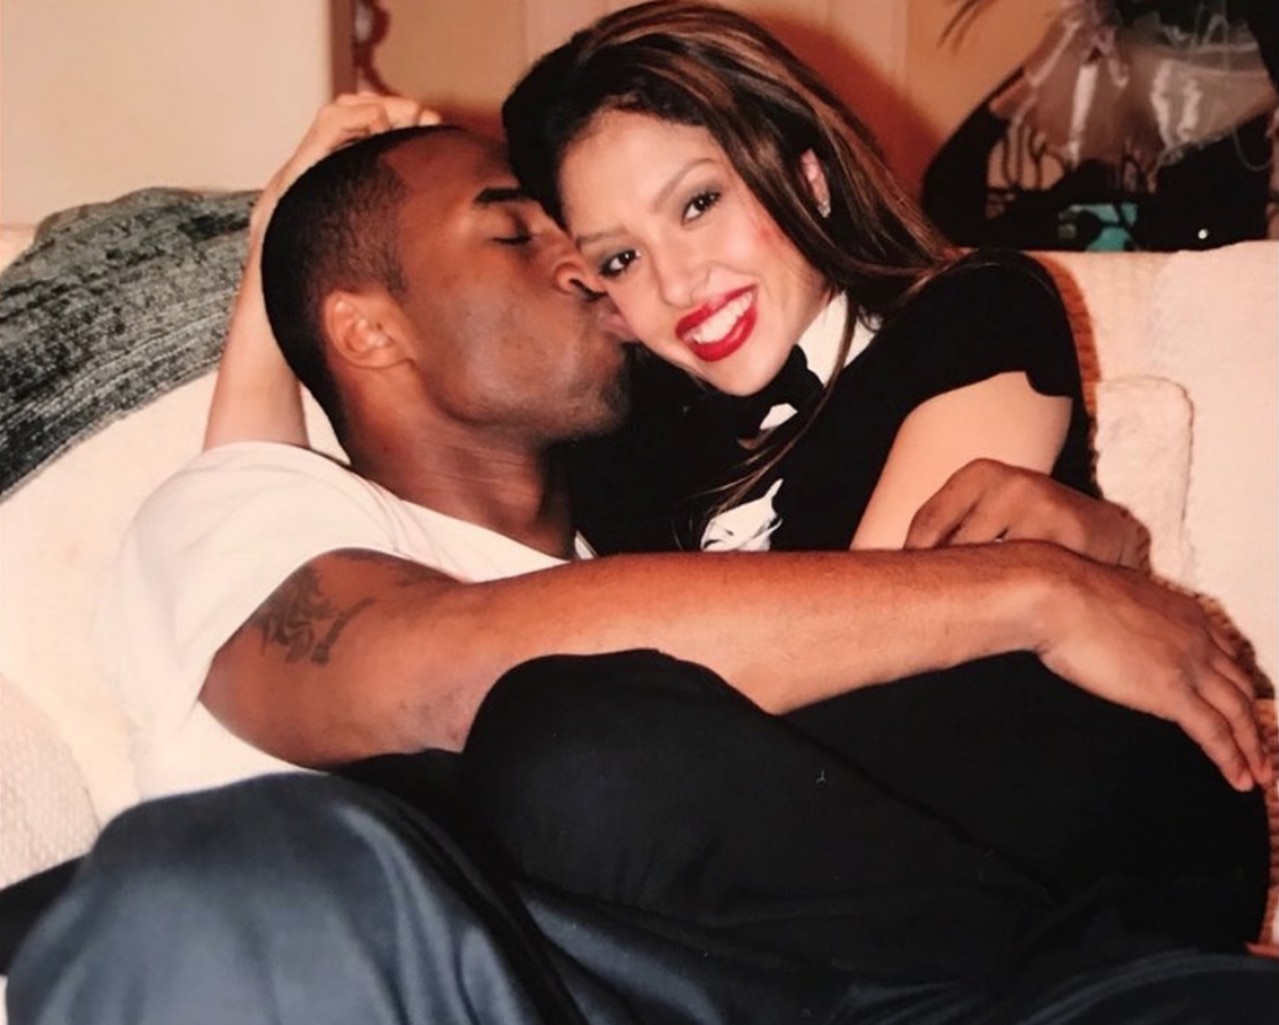 Vanessa Bryant celebrates her relationship with Kobe Bryant on the 19th anniversary of their wedding.